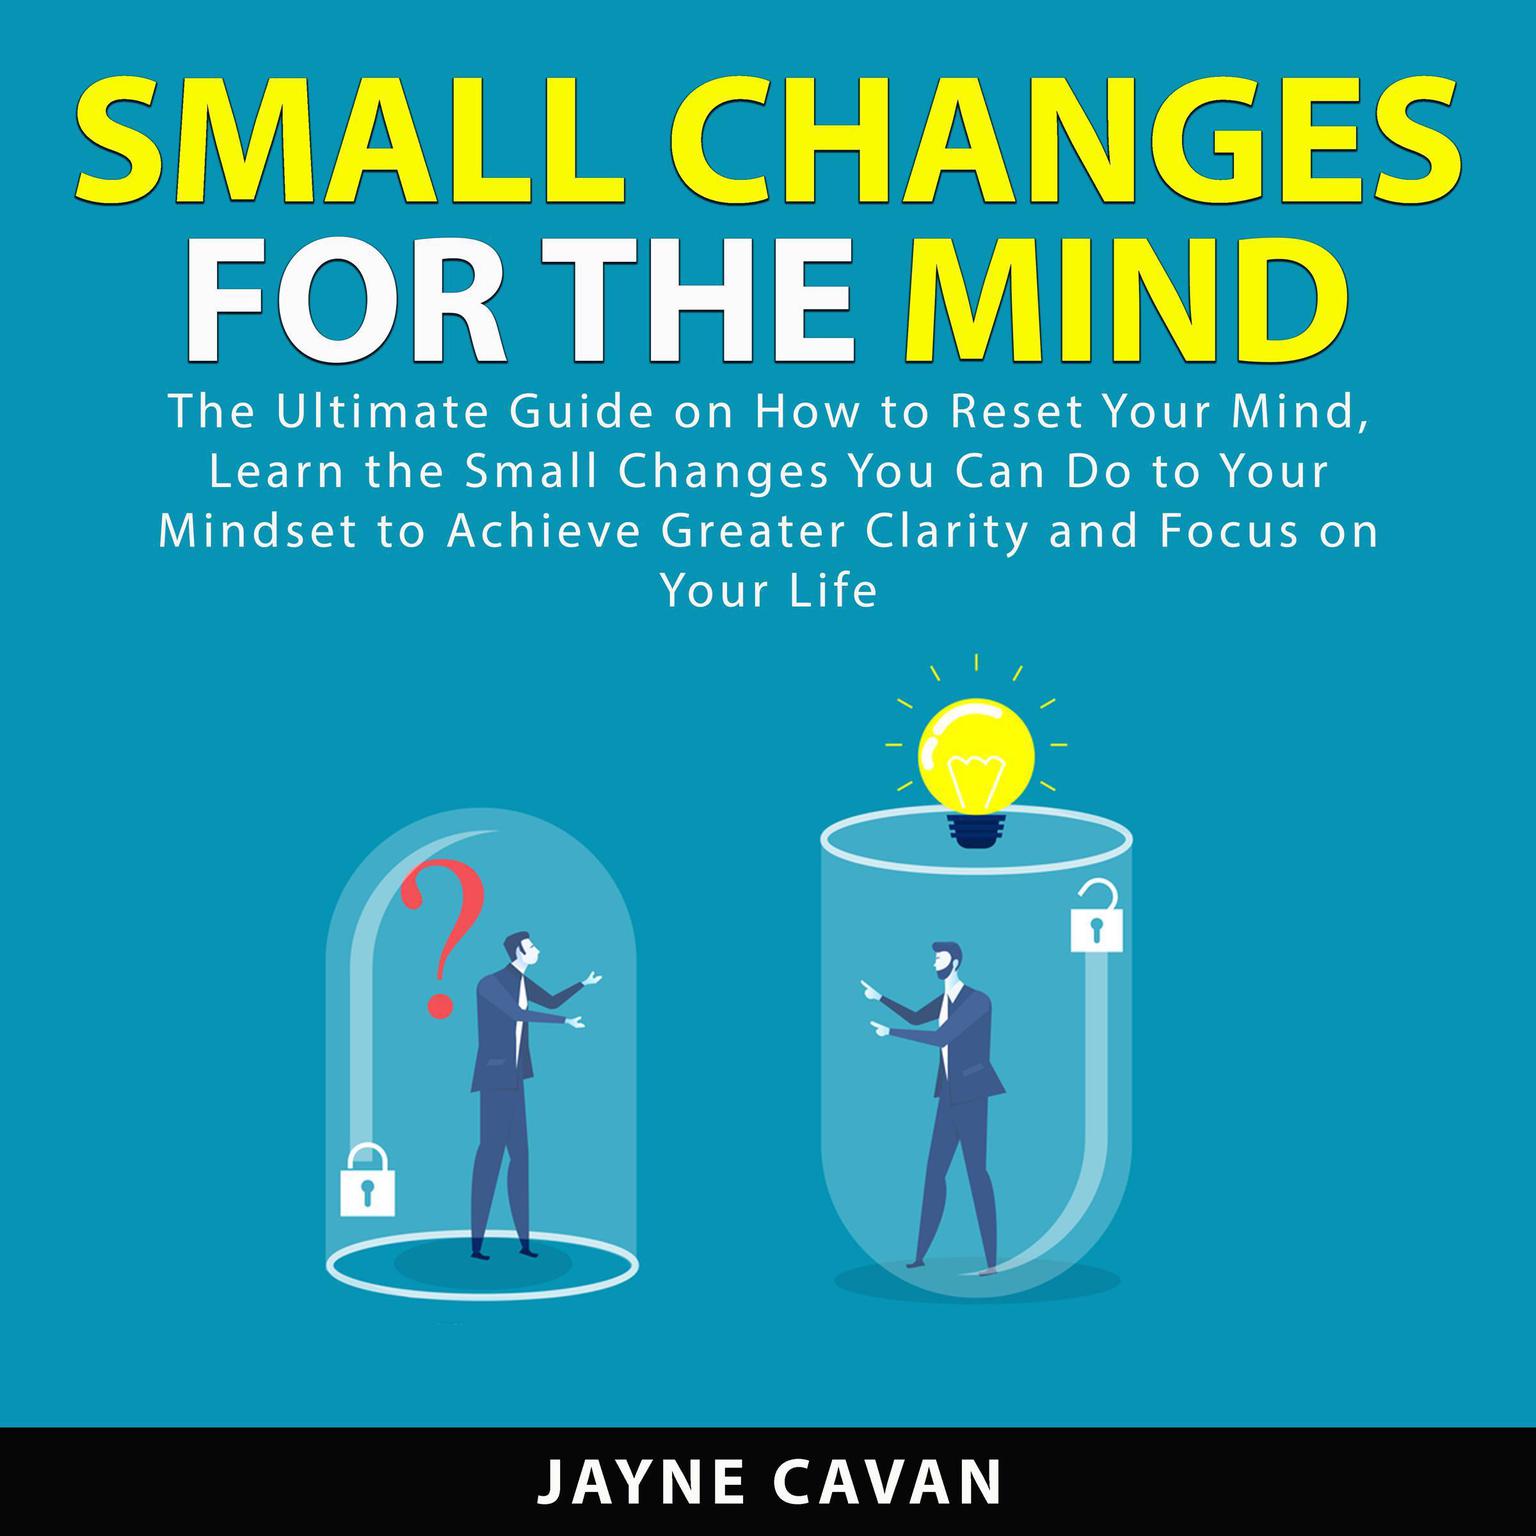 Small Changes for the Mind: The Ultimate Guide on How to Reset Your Mind, Learn the Small Changes You Can Do to Your Mindset to Achieve Greater Clarity and Focus on Your Life Audiobook, by Jayne Cavan